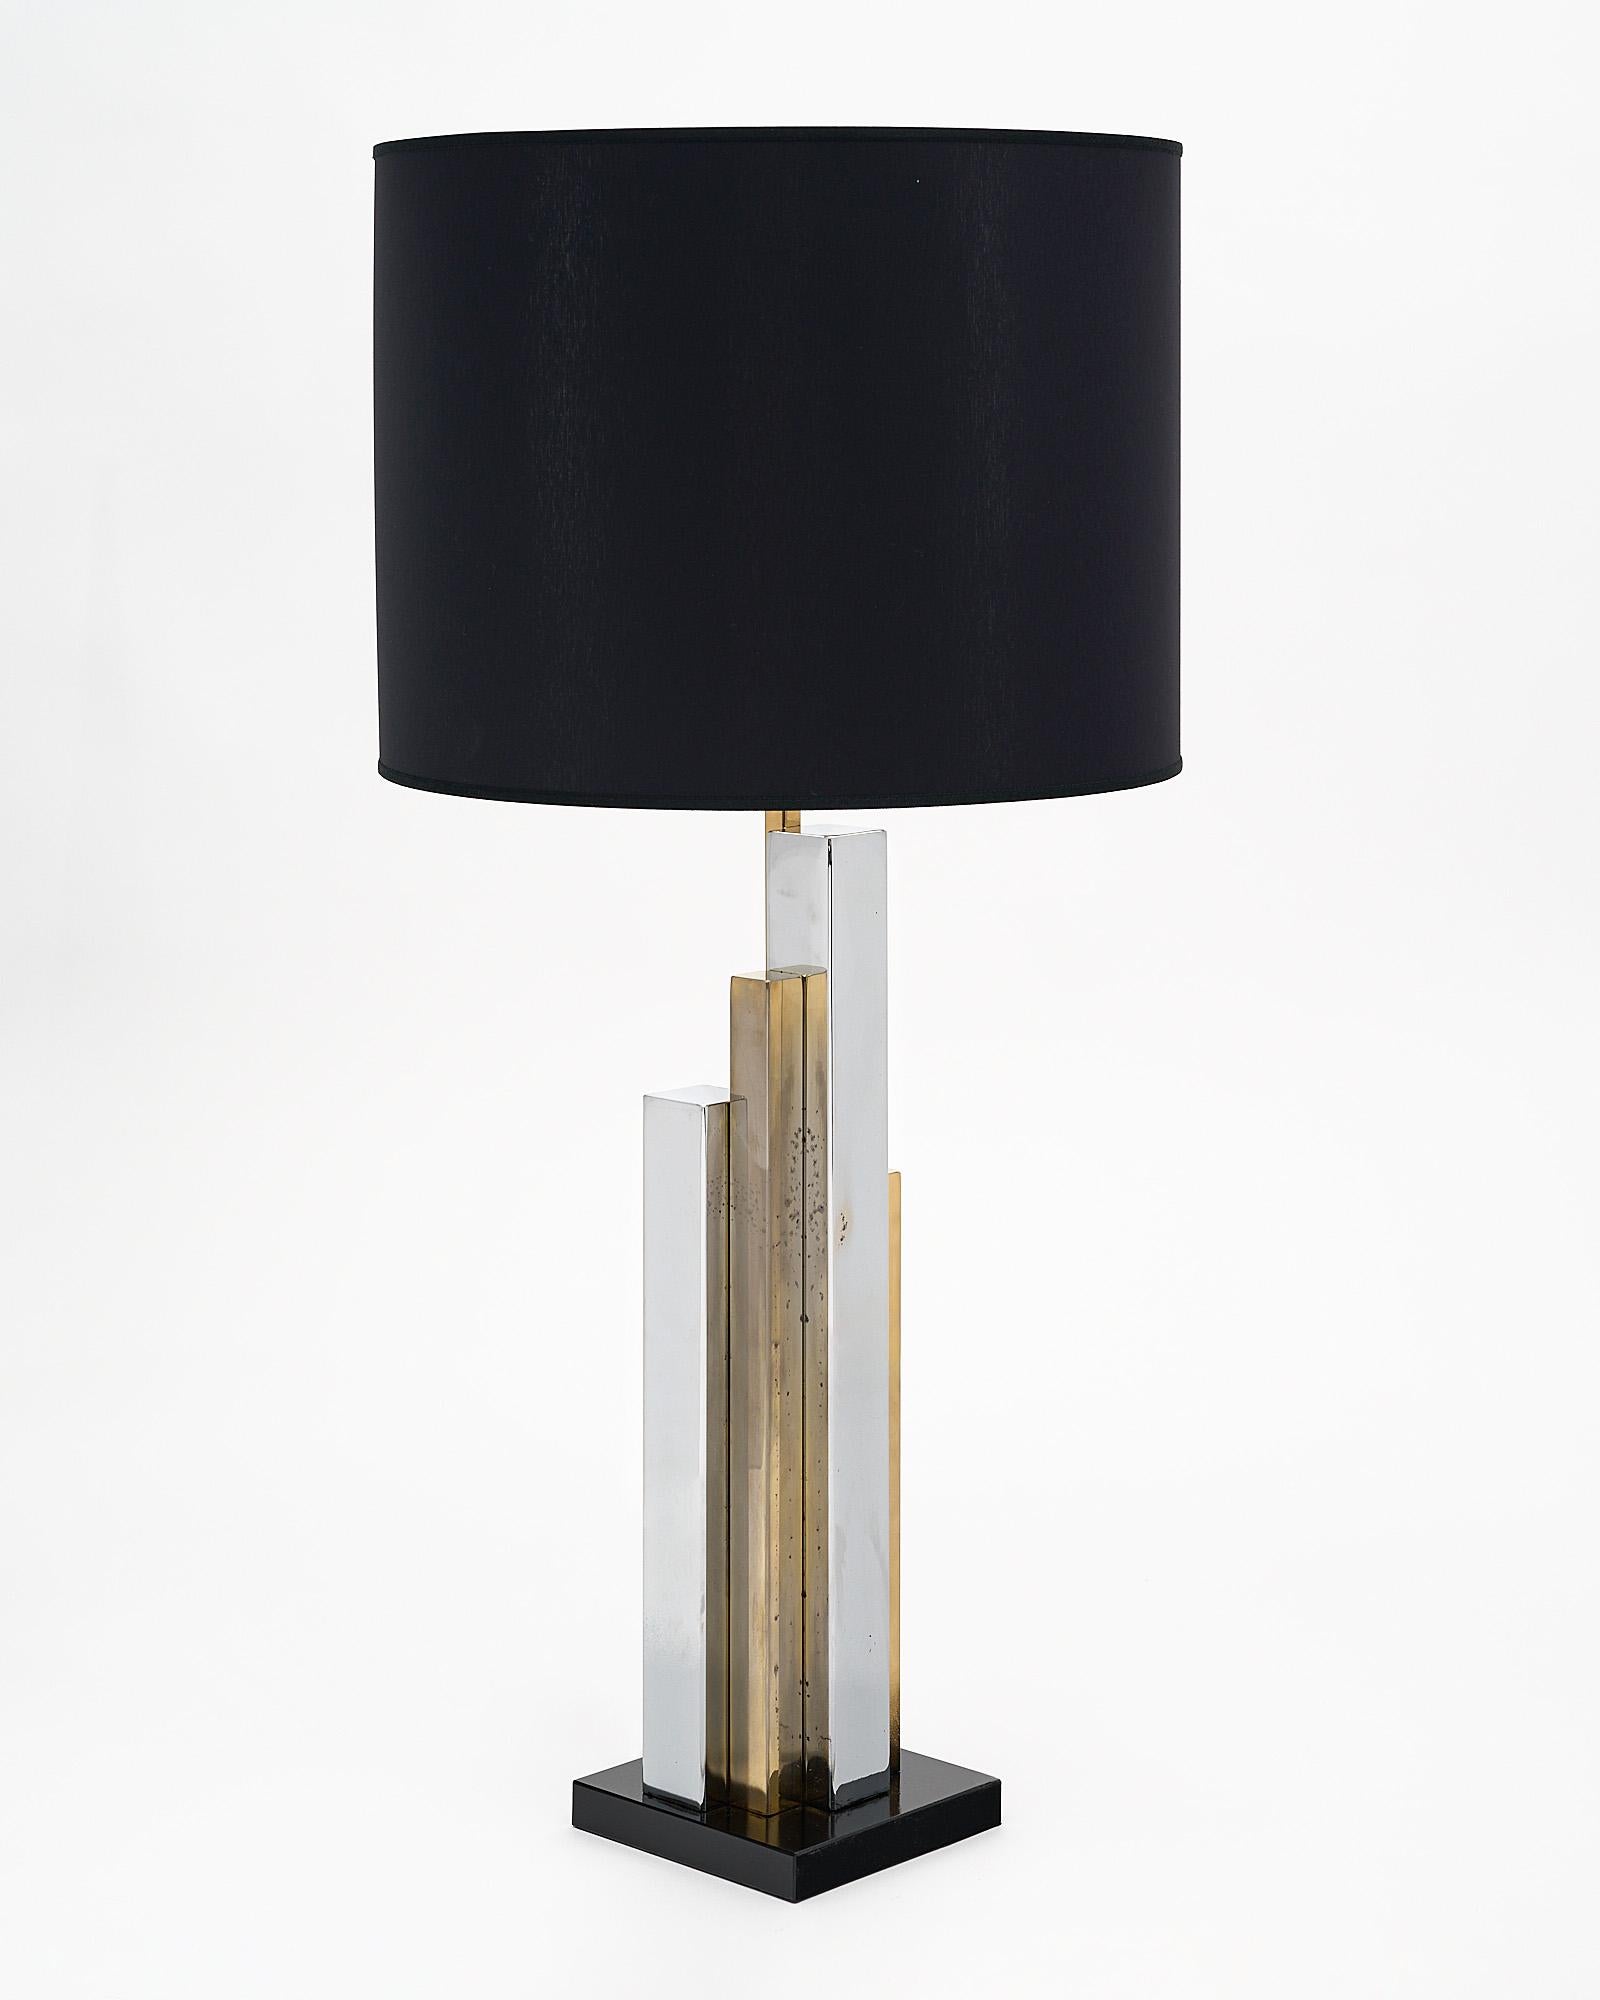 Lamp, French, by creator Philippe Cheverny. This Modernist lamp mimics a stylized skyscraper with brass and chromed steel components. It has been newly wired to fit US standards.